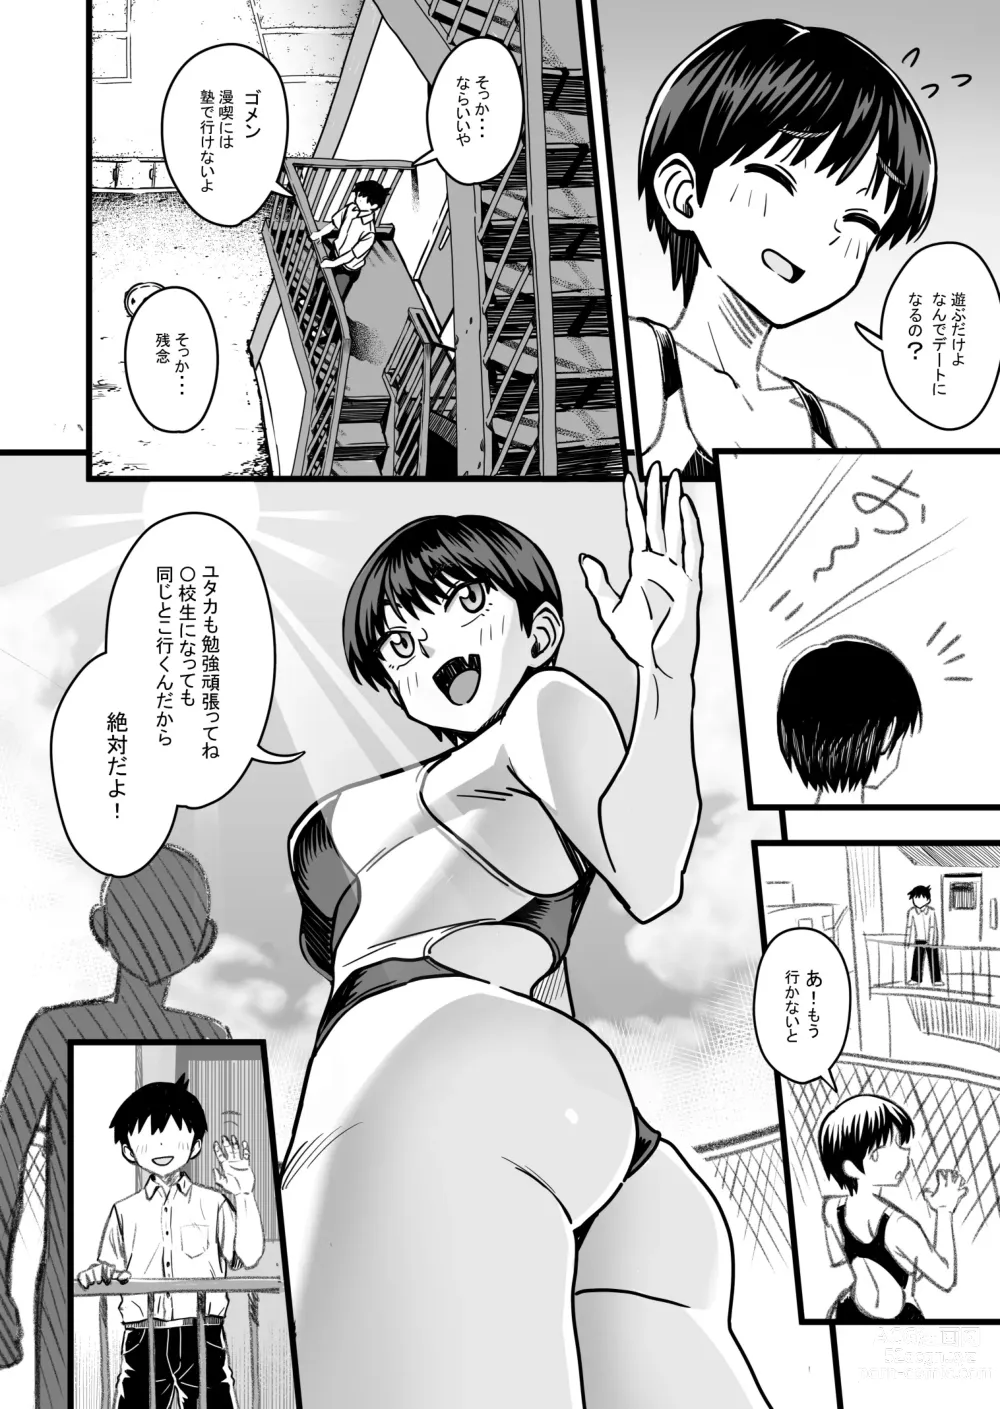 Page 17 of doujinshi How will the Protagonist's Brain be destroyed?